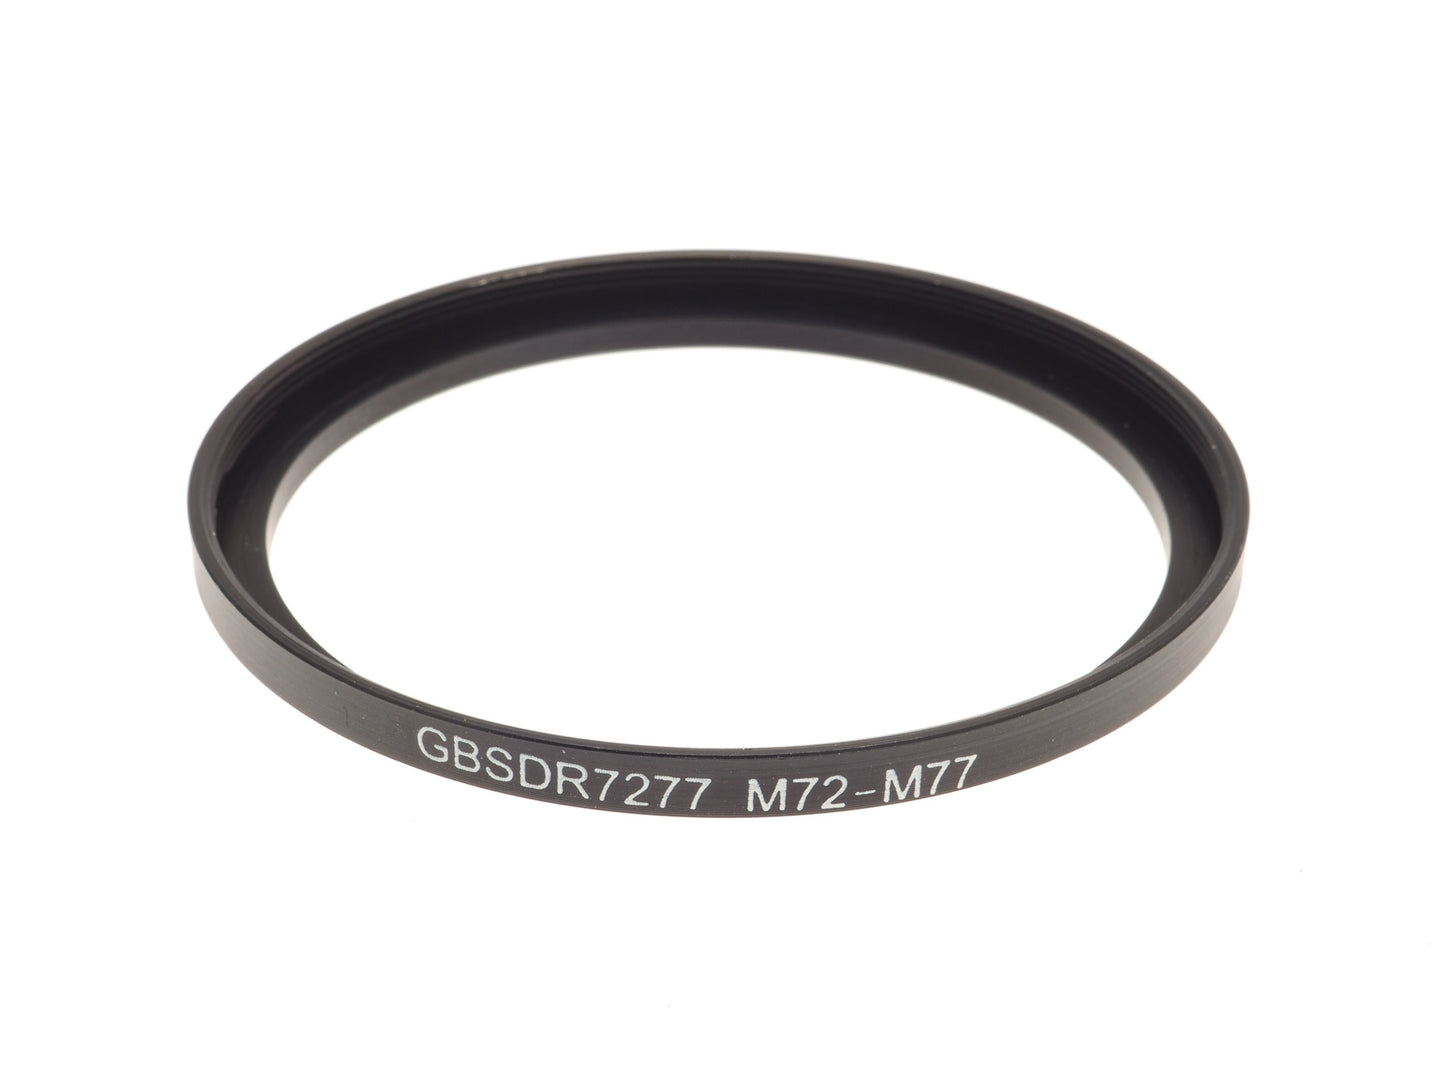 Generic Step-Up Ring 72mm-77mm - Accessory